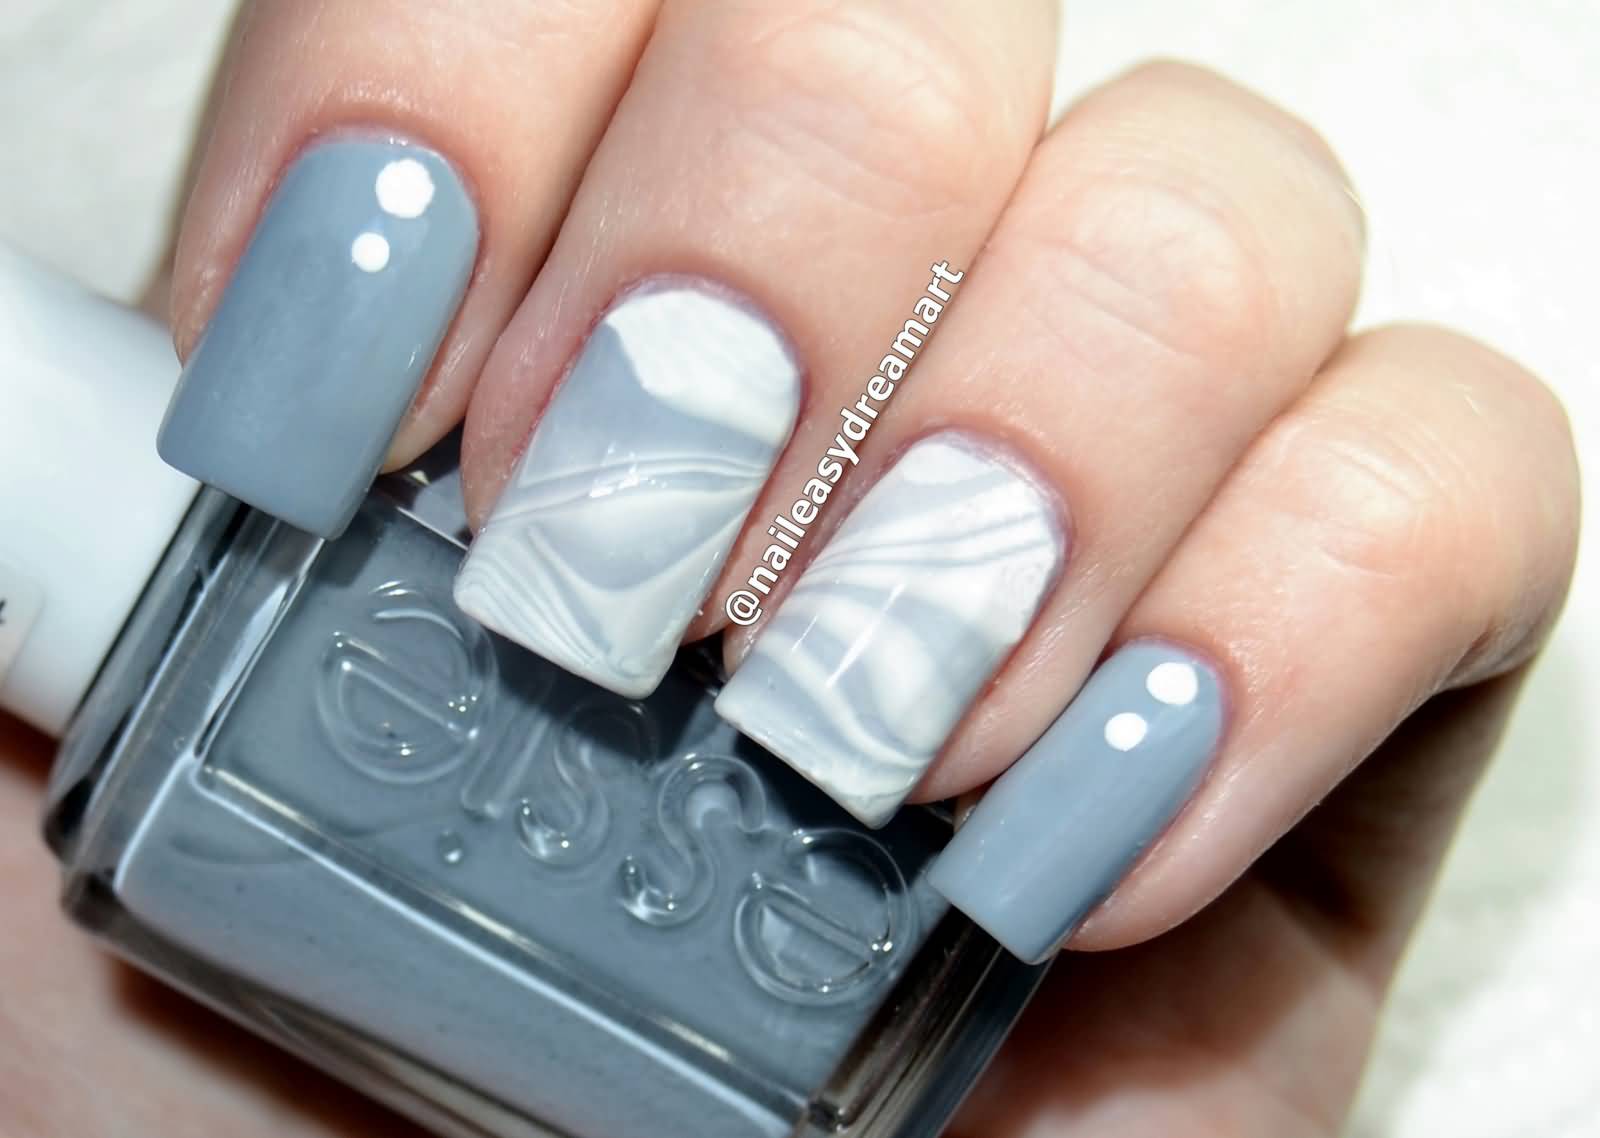 Gray And White Water Marble Nail Art